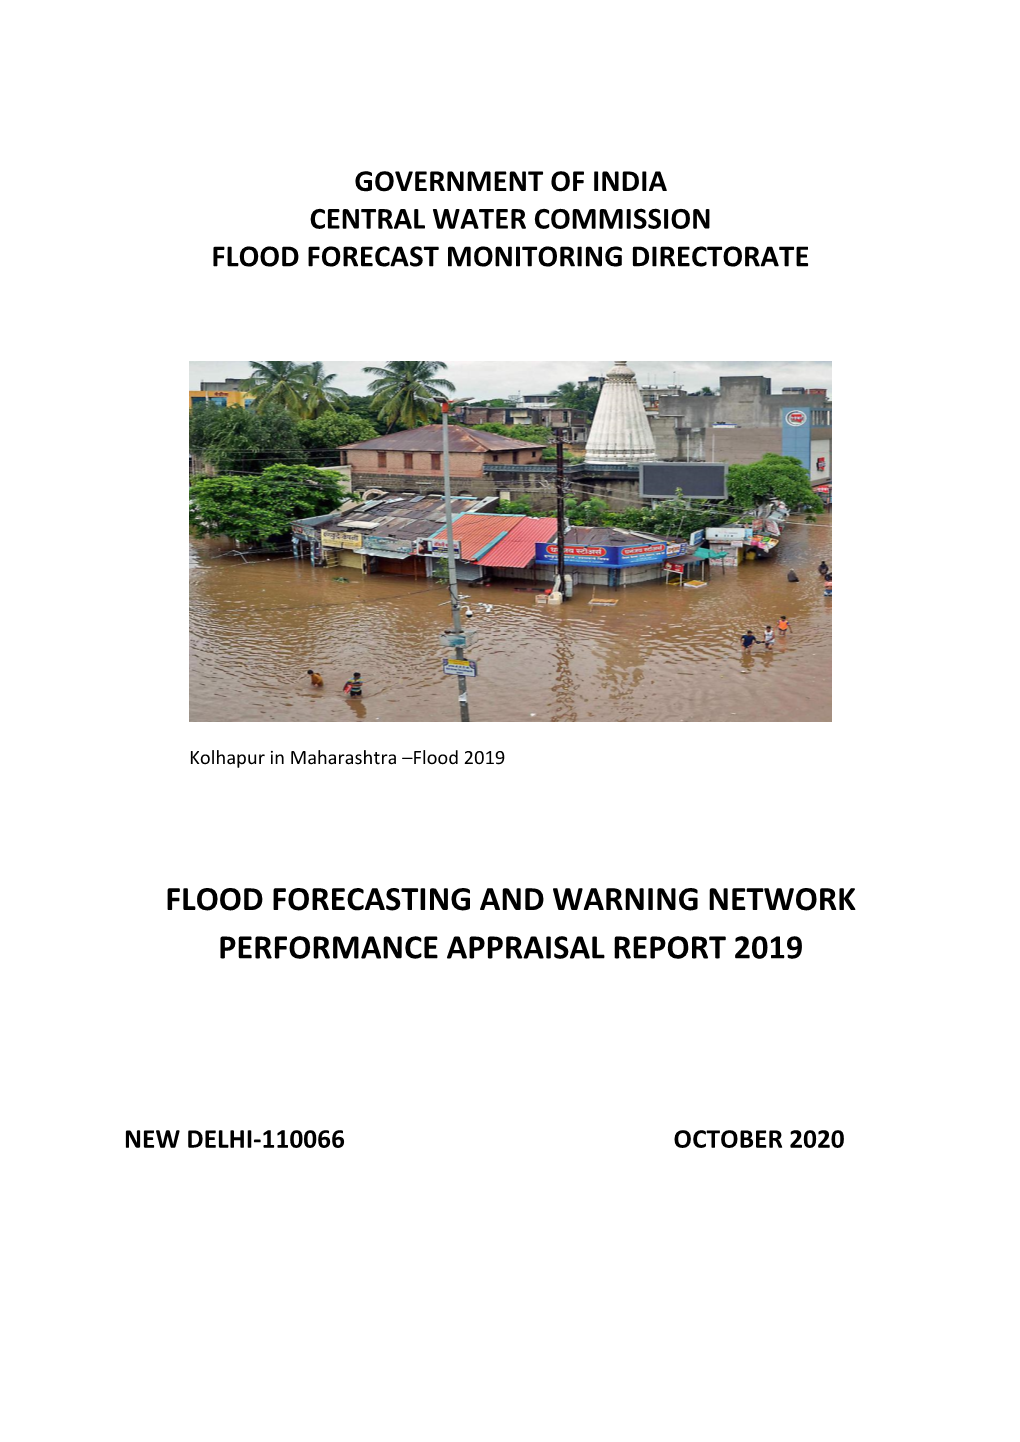 Flood Forecasting and Warning Network Performance Appraisal Report 2019